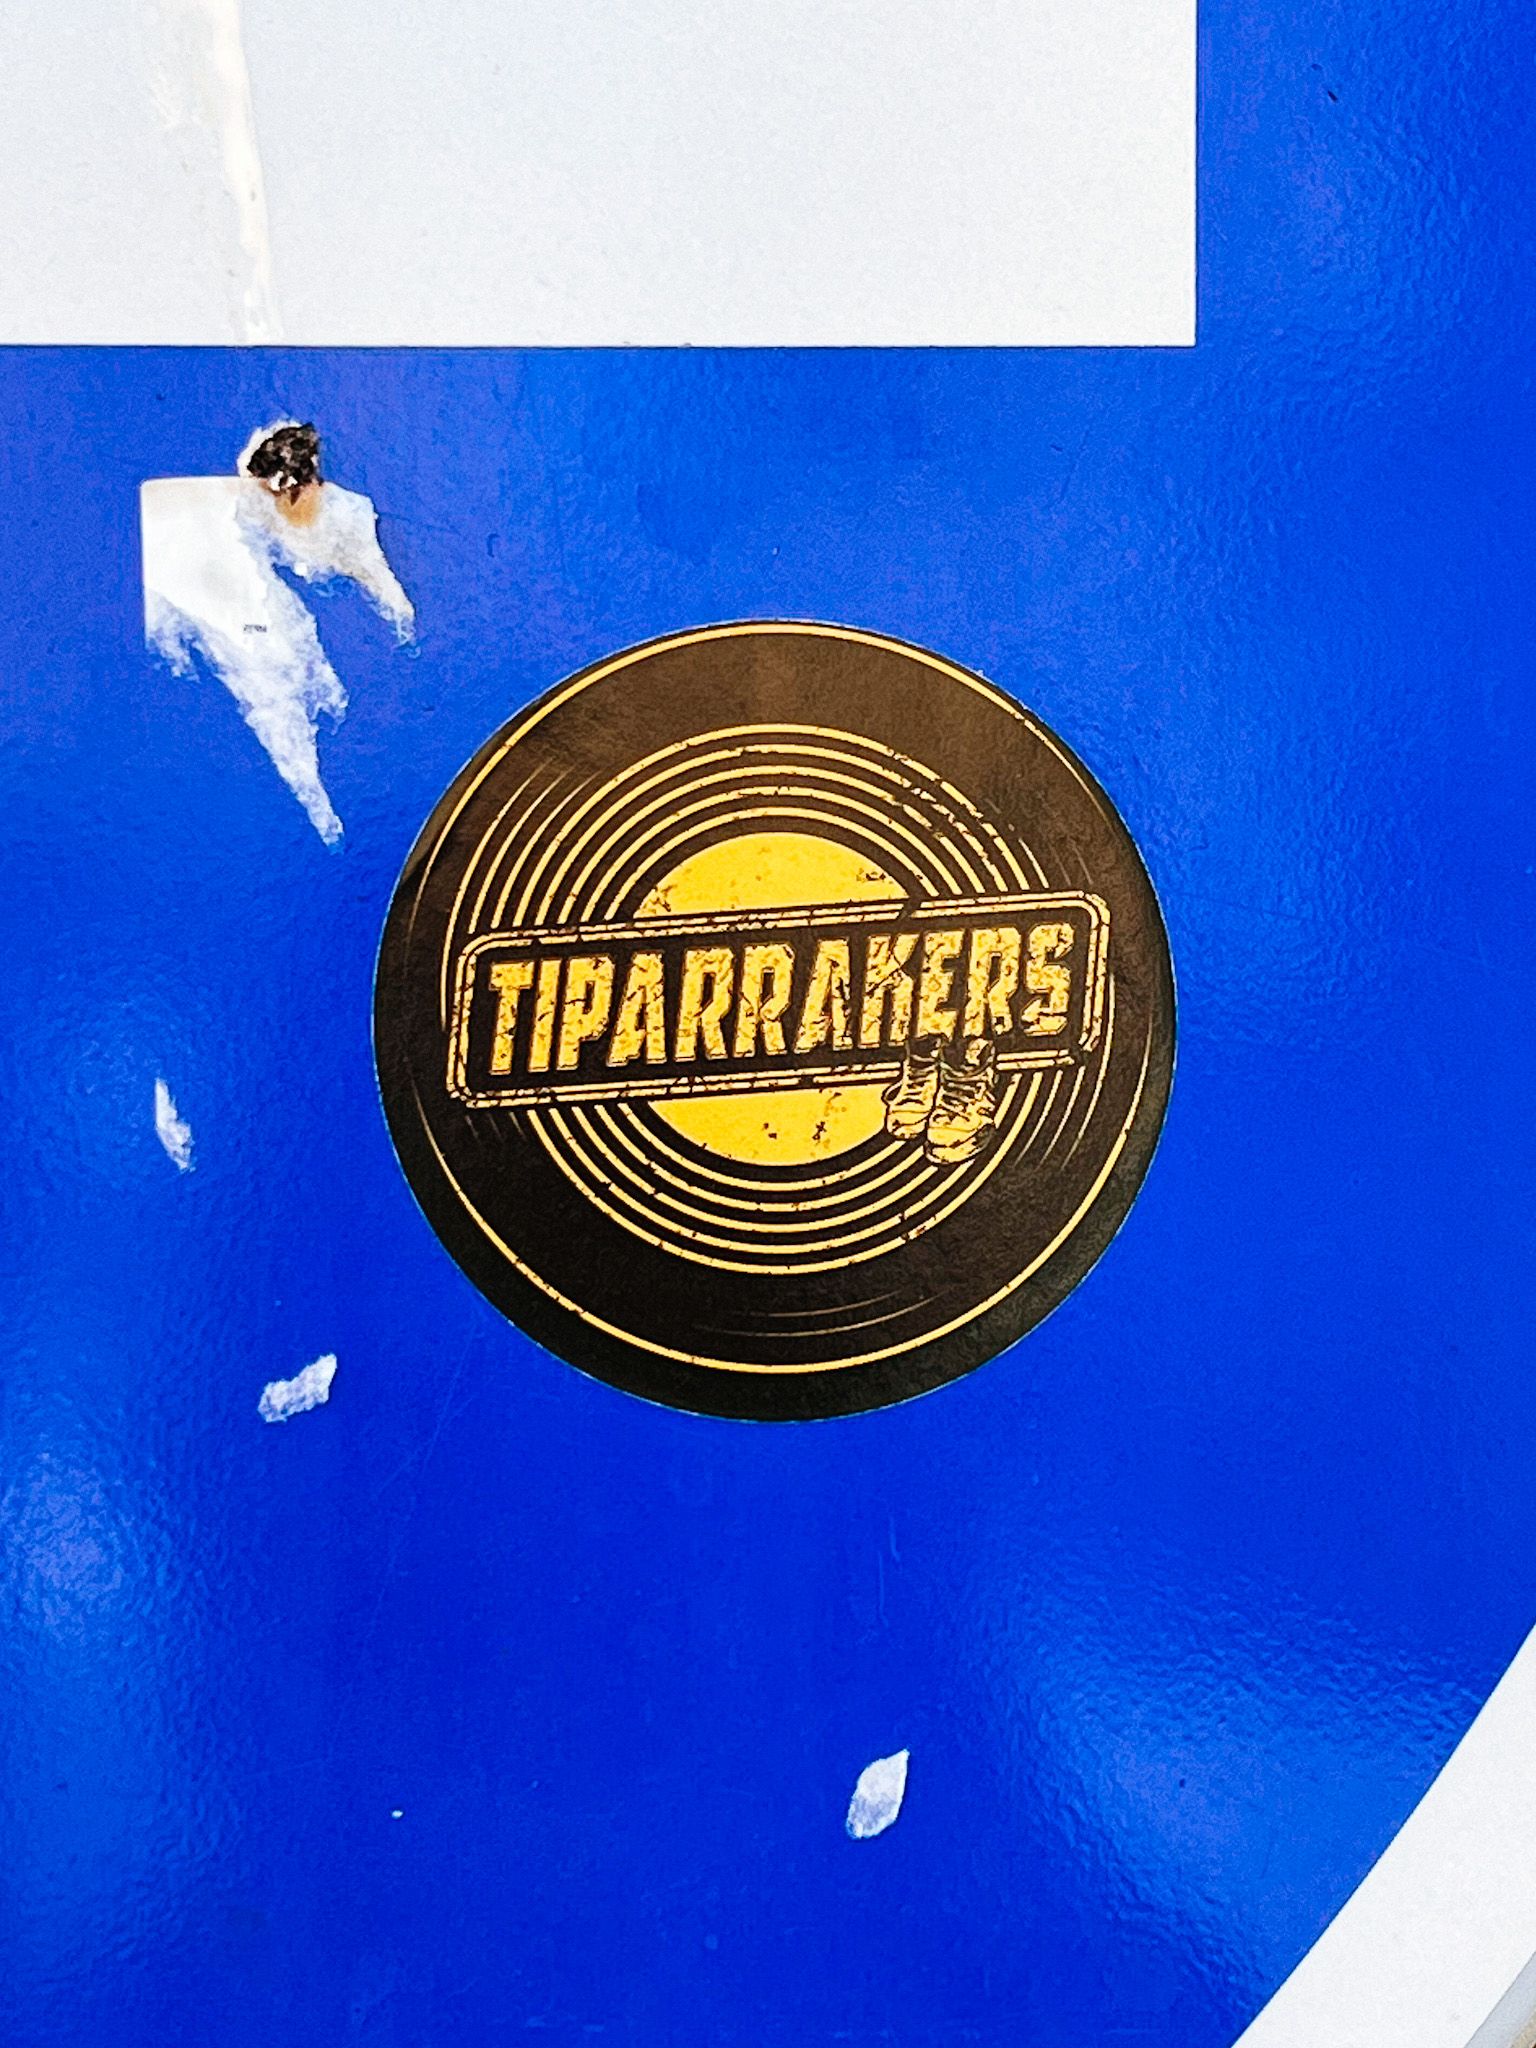 tiparrakers